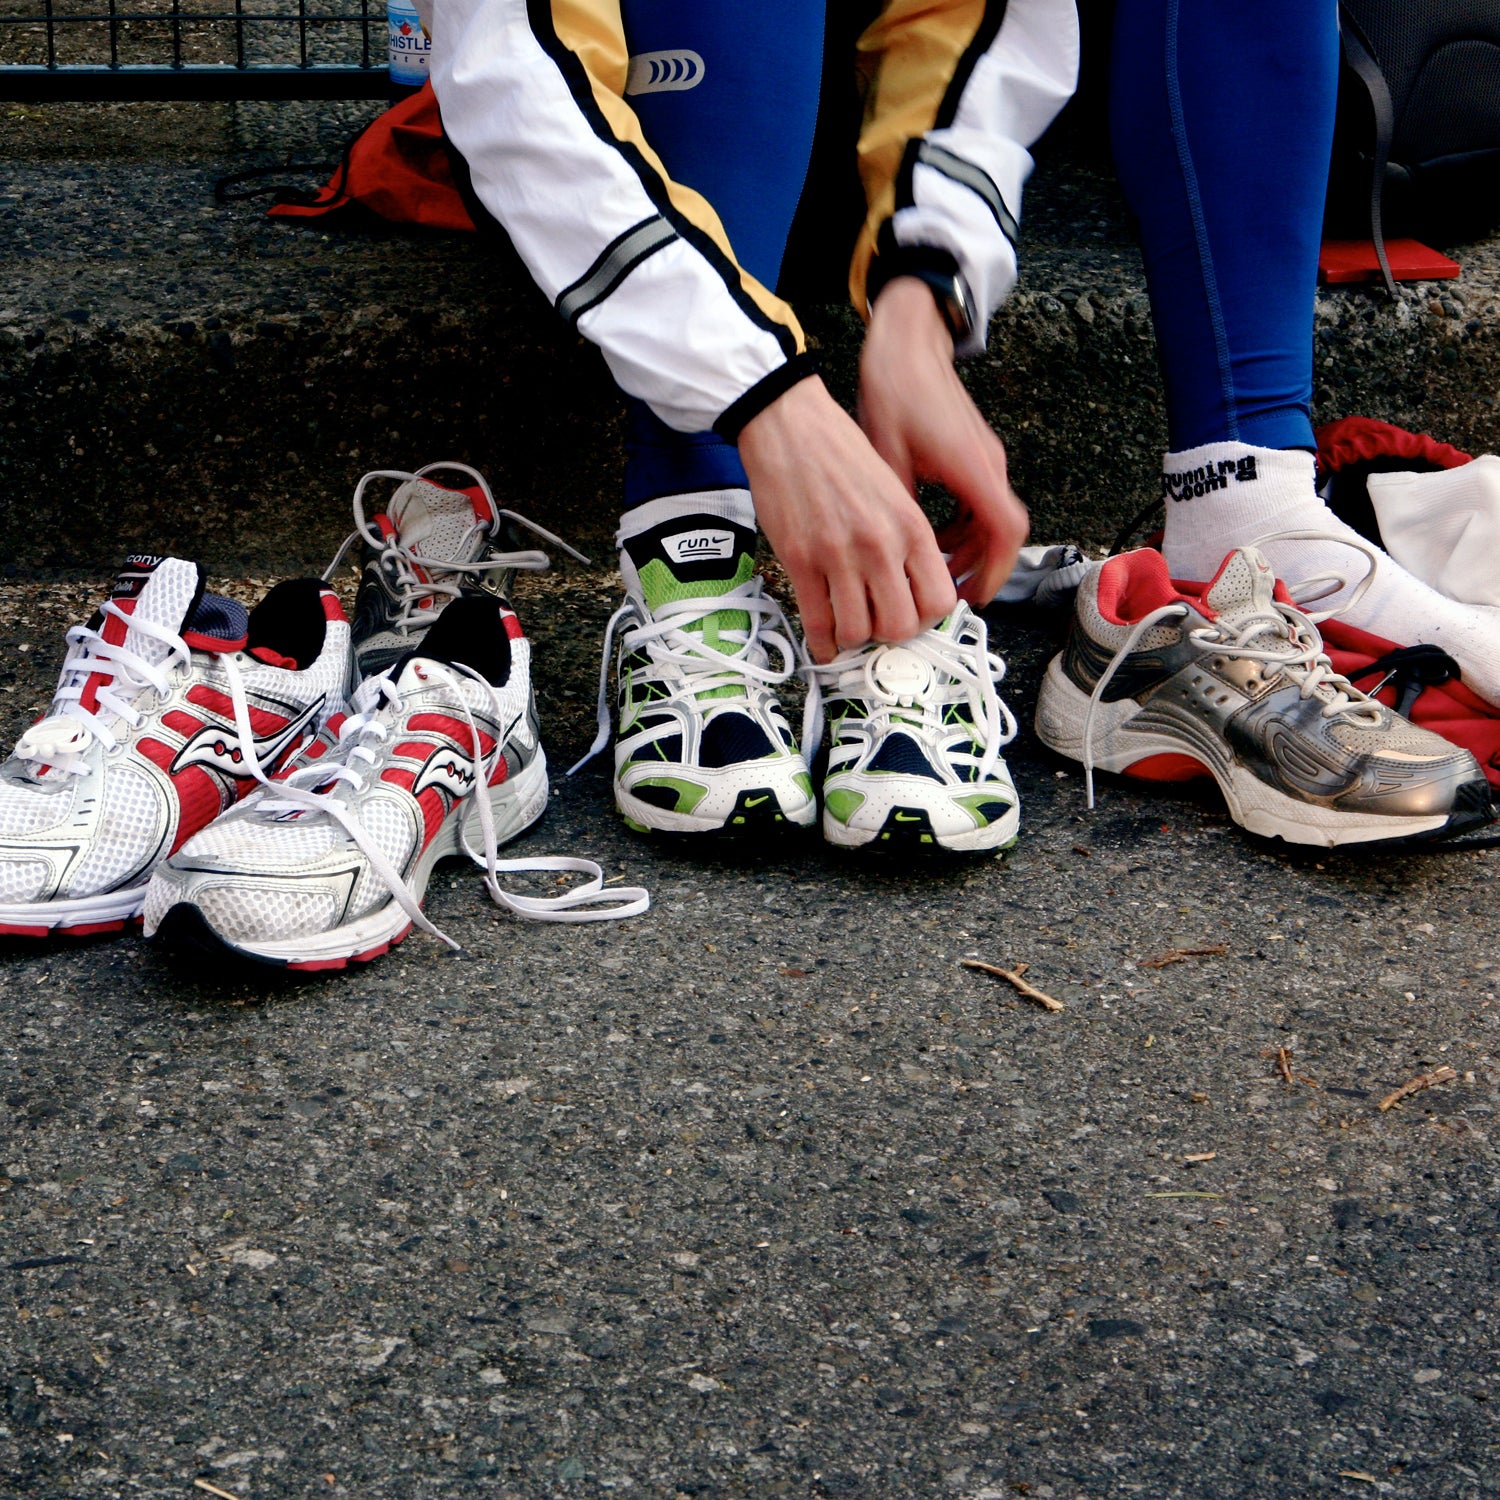 Elastic Laces Vs Standard Laces – Which Are Faster For Triathletes? 